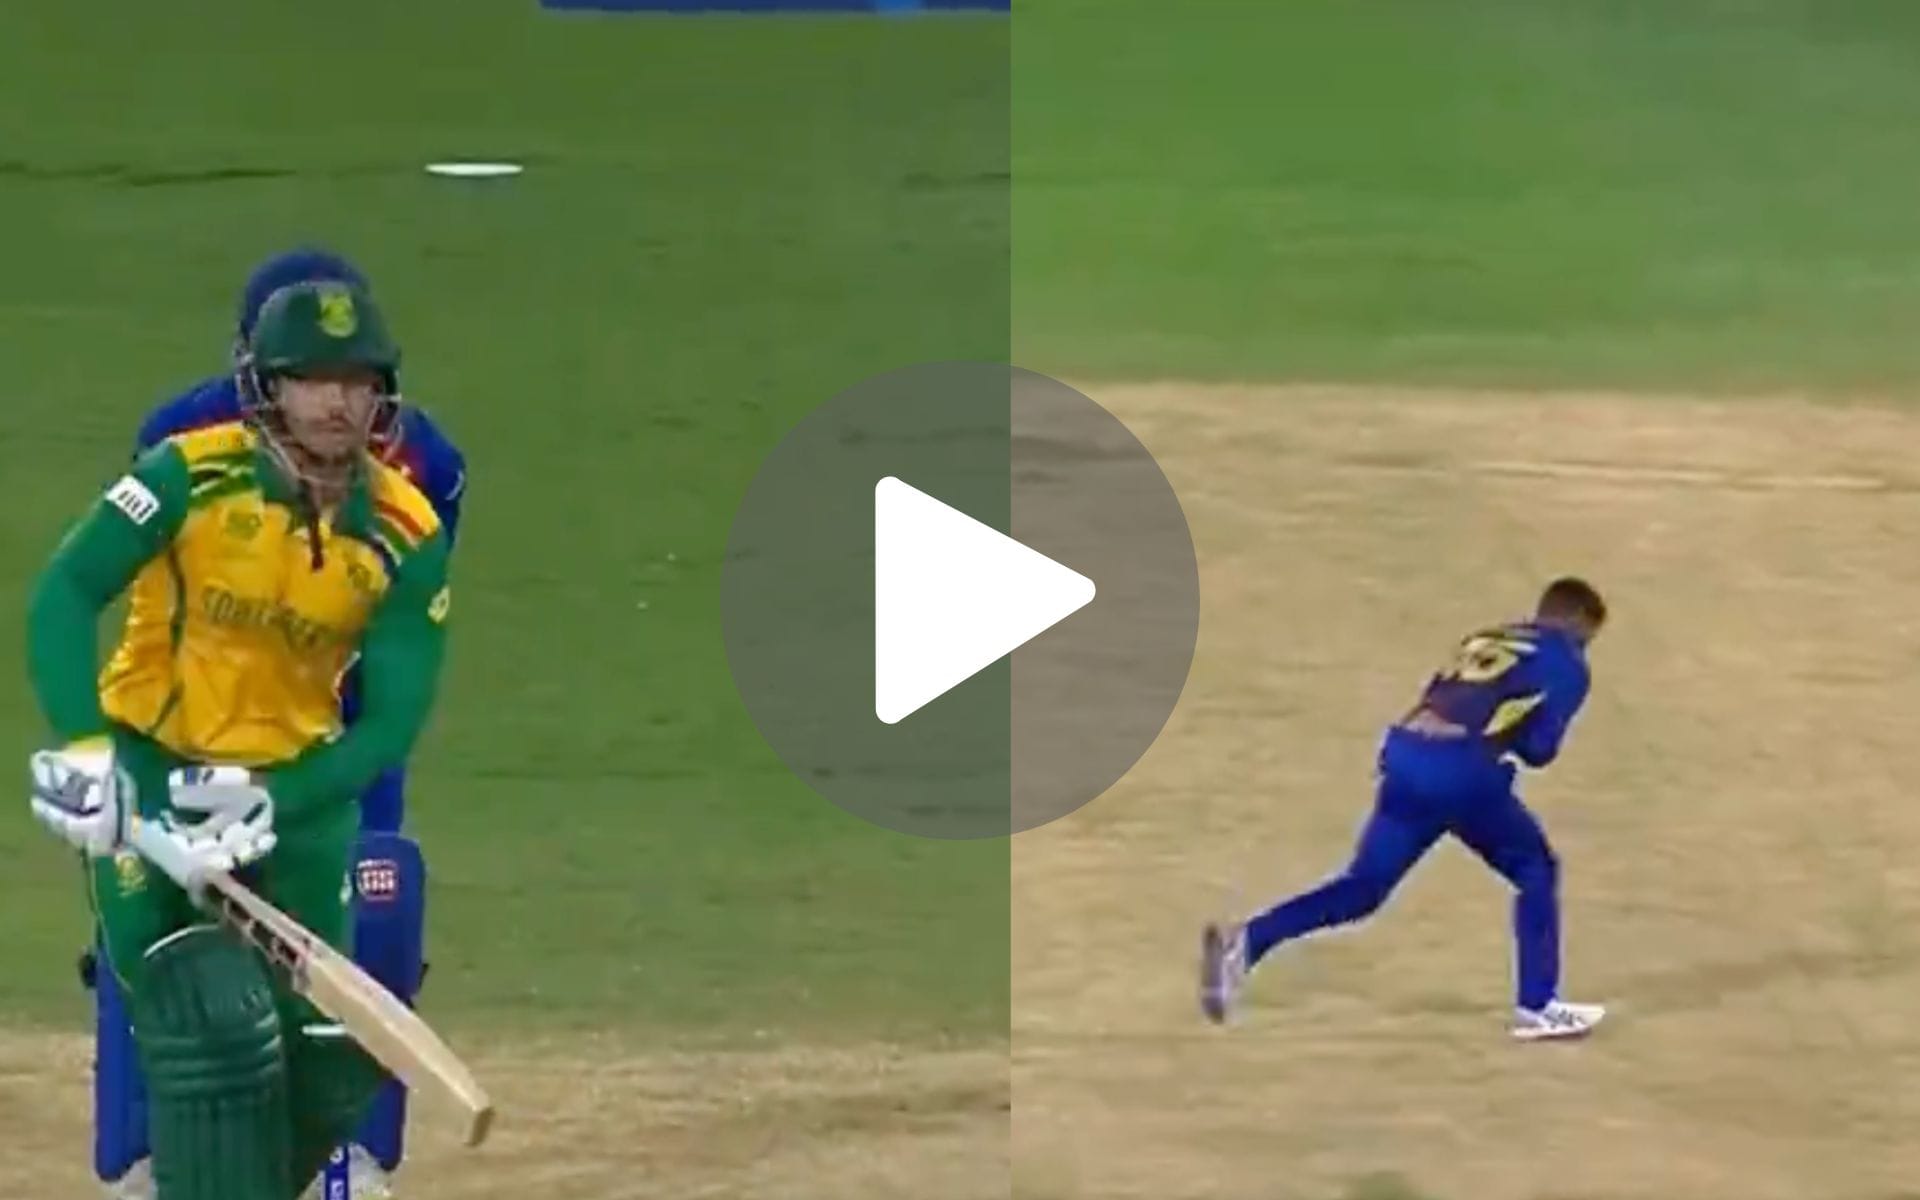 [Watch] Dipendra Airee Shows His Magic Sends QDK Back To The Hut Early